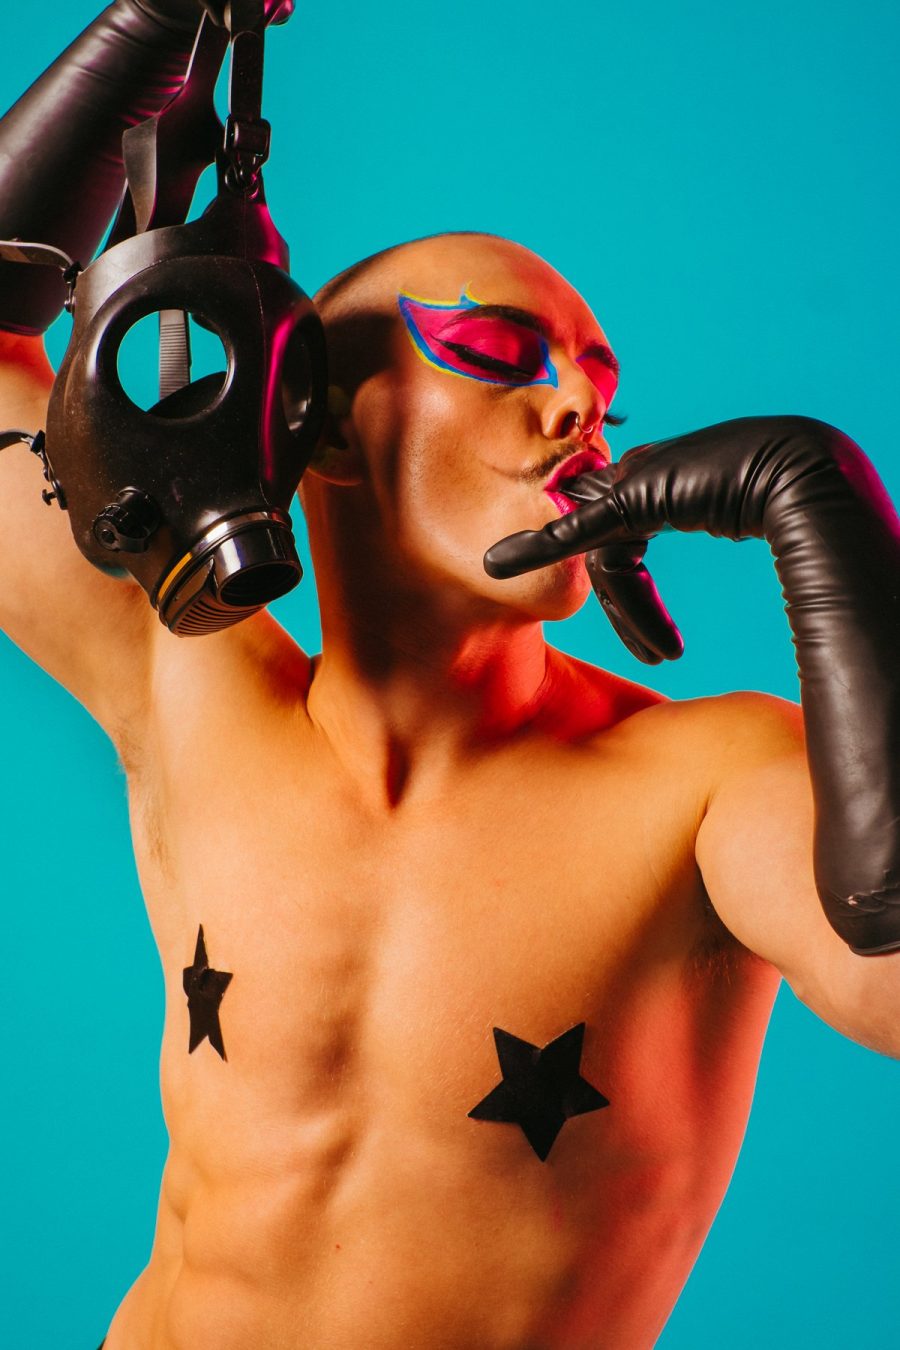 A queer performer with graphic eyeliner and star-shaped nipple pasties.